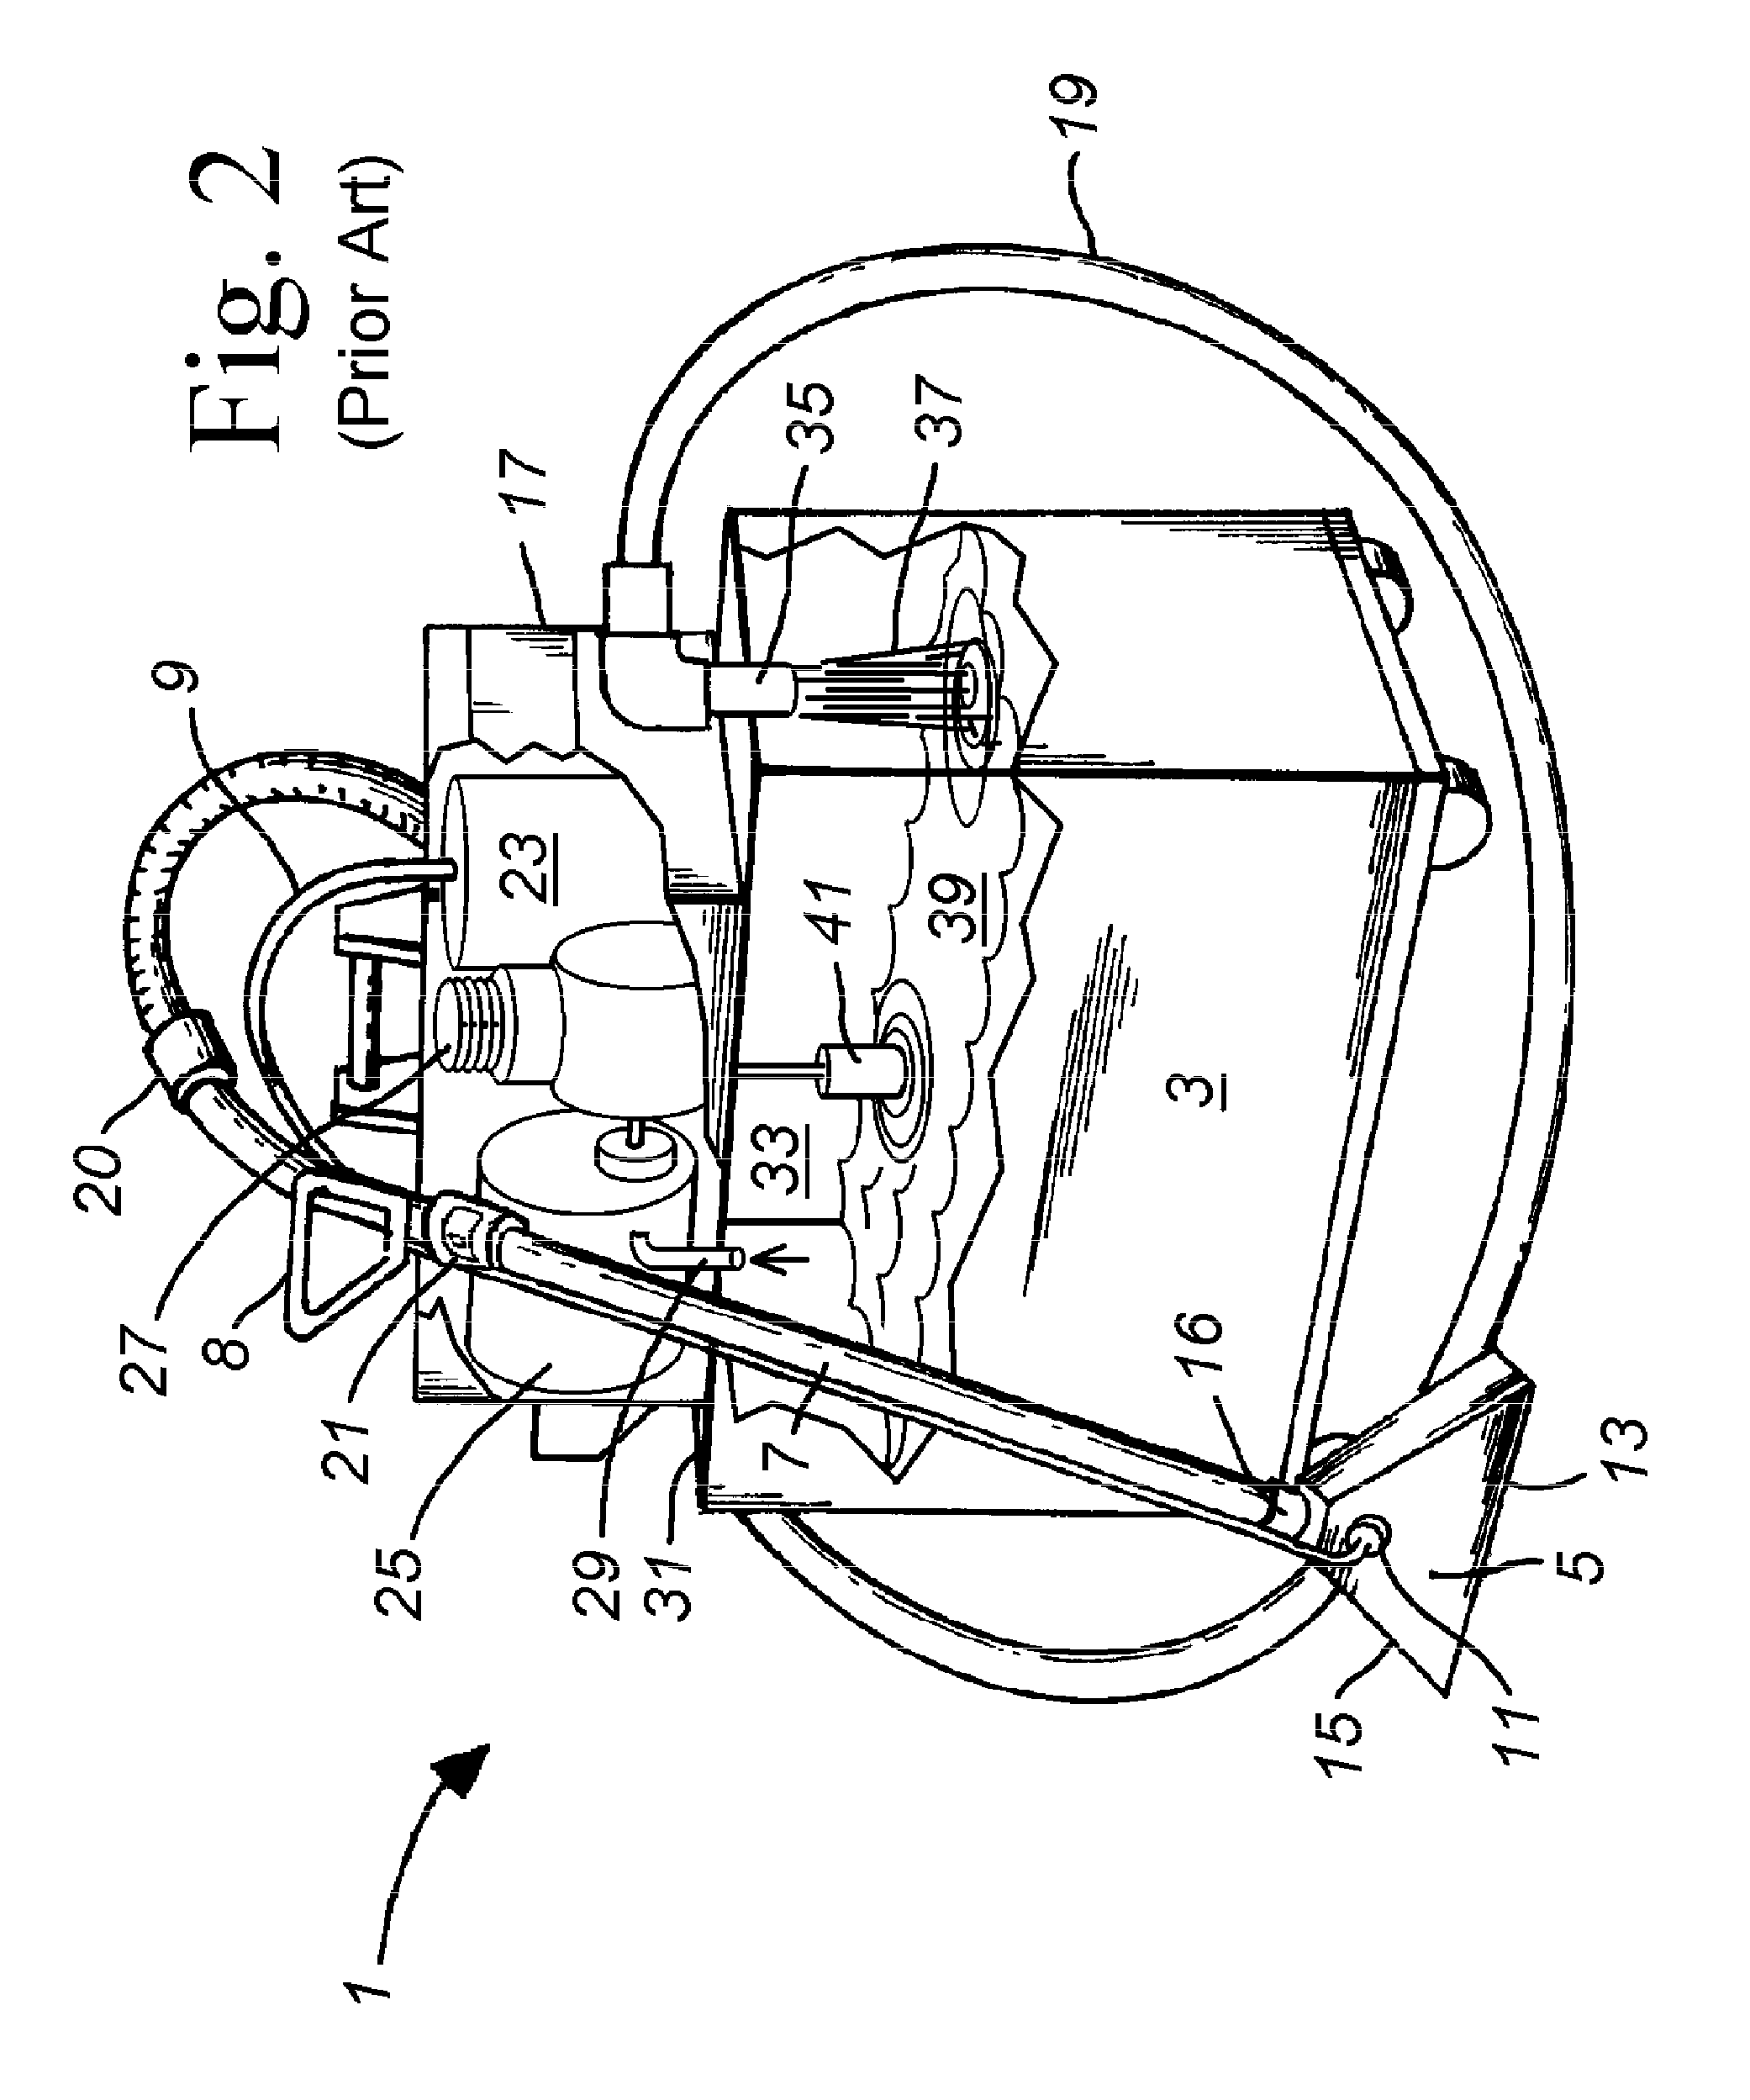 Rotary surface cleaning tool